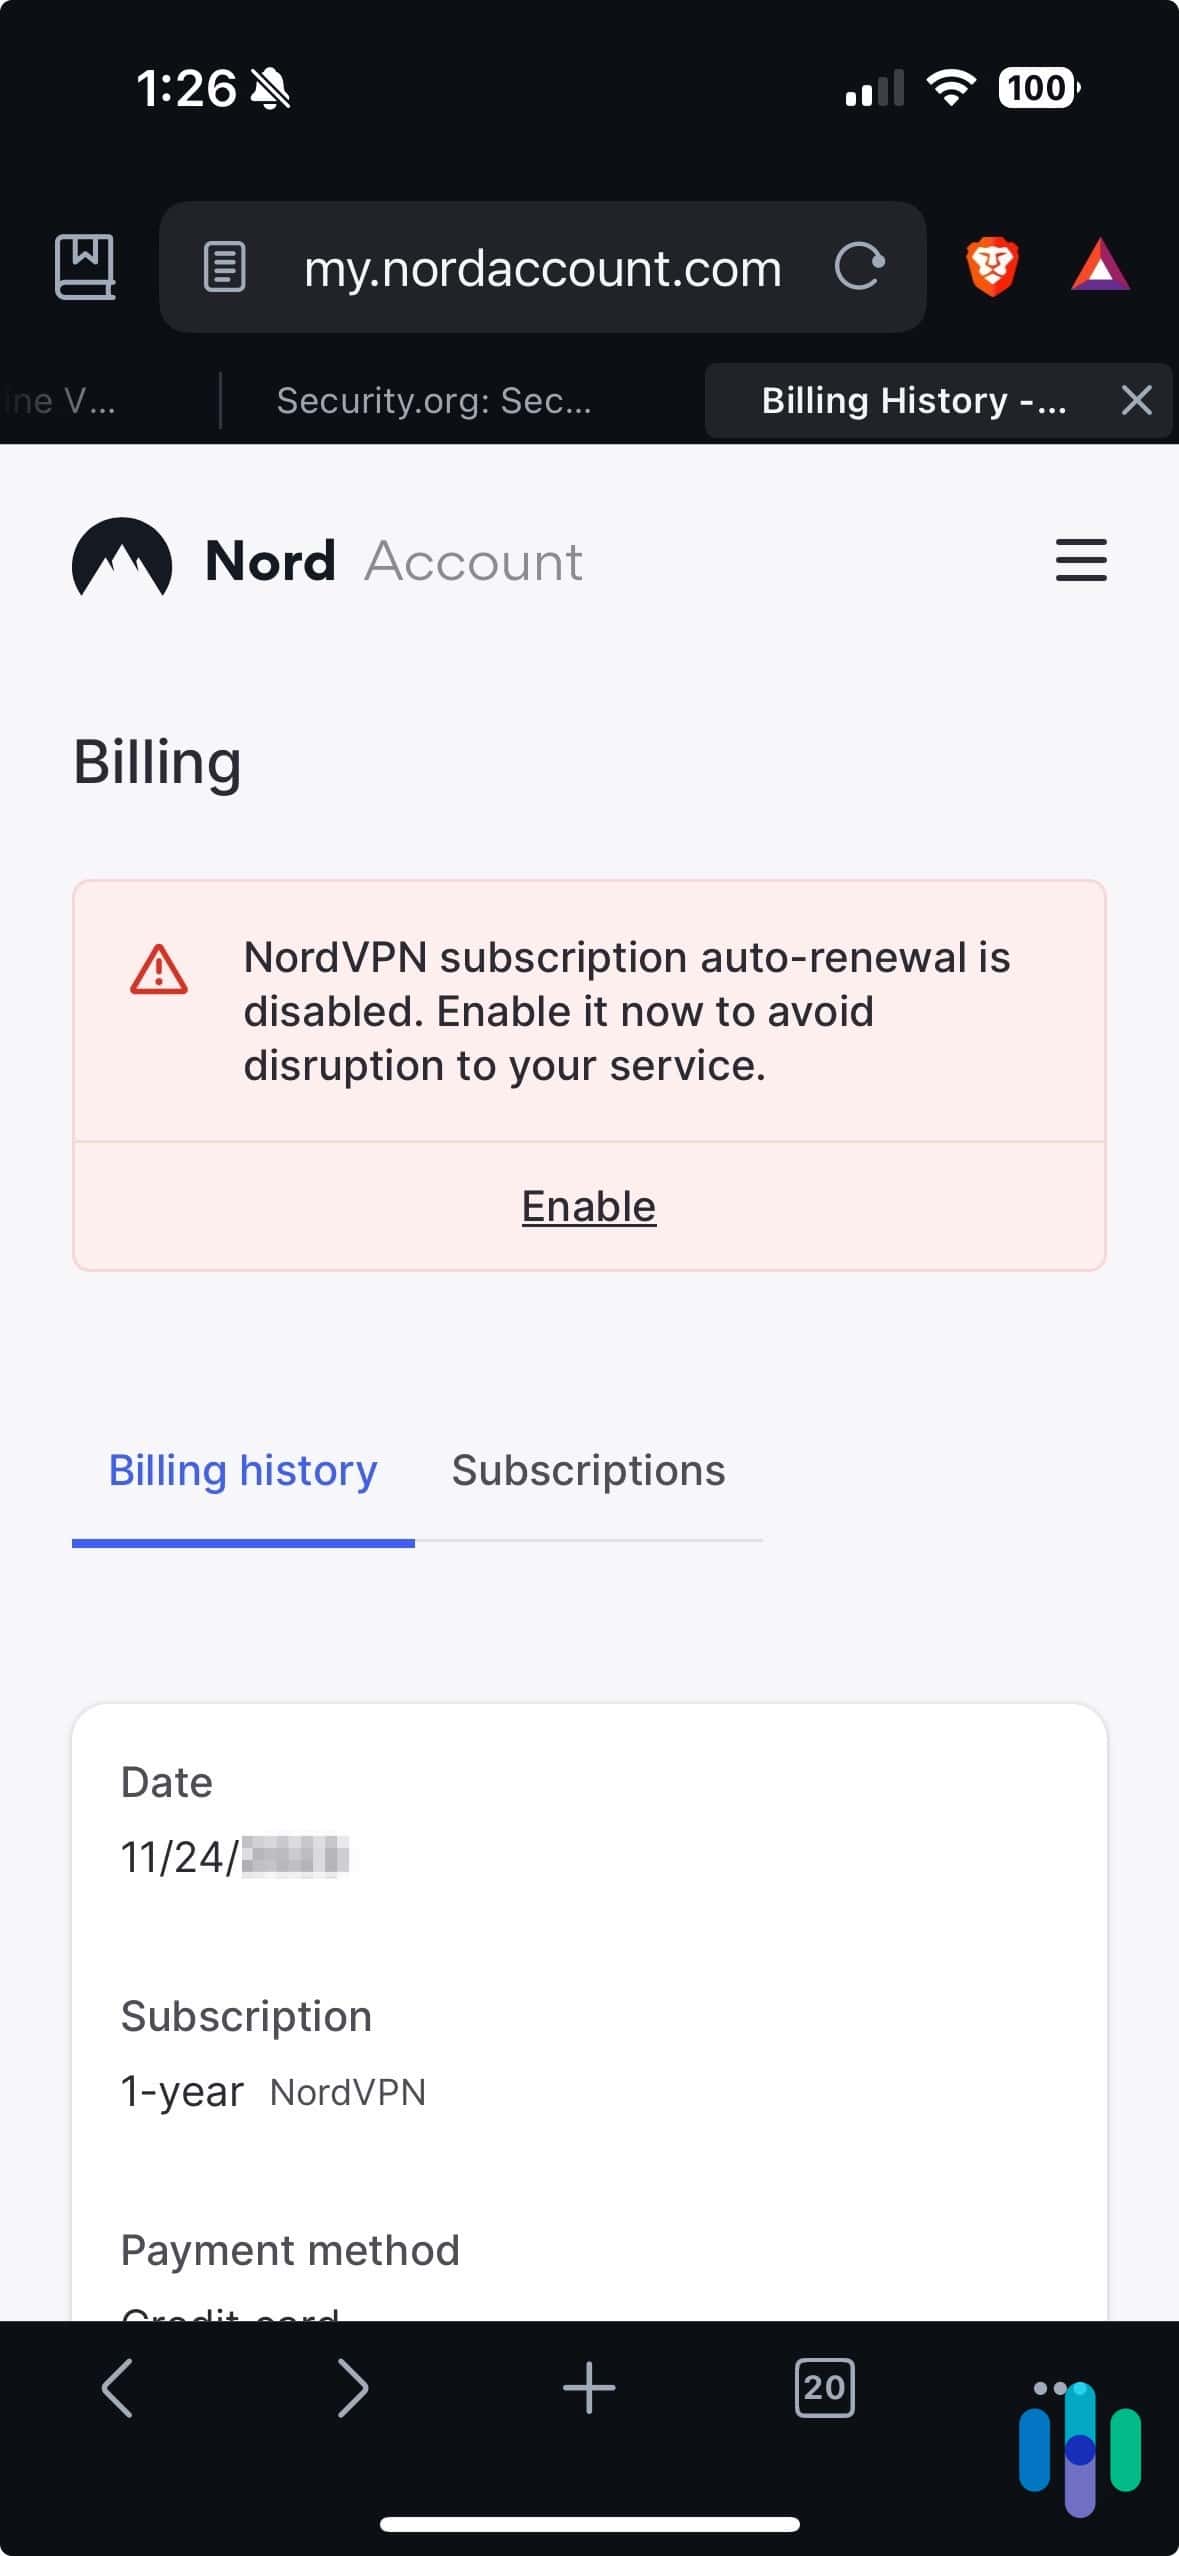 NordVPN's auto-renewal disabled notification